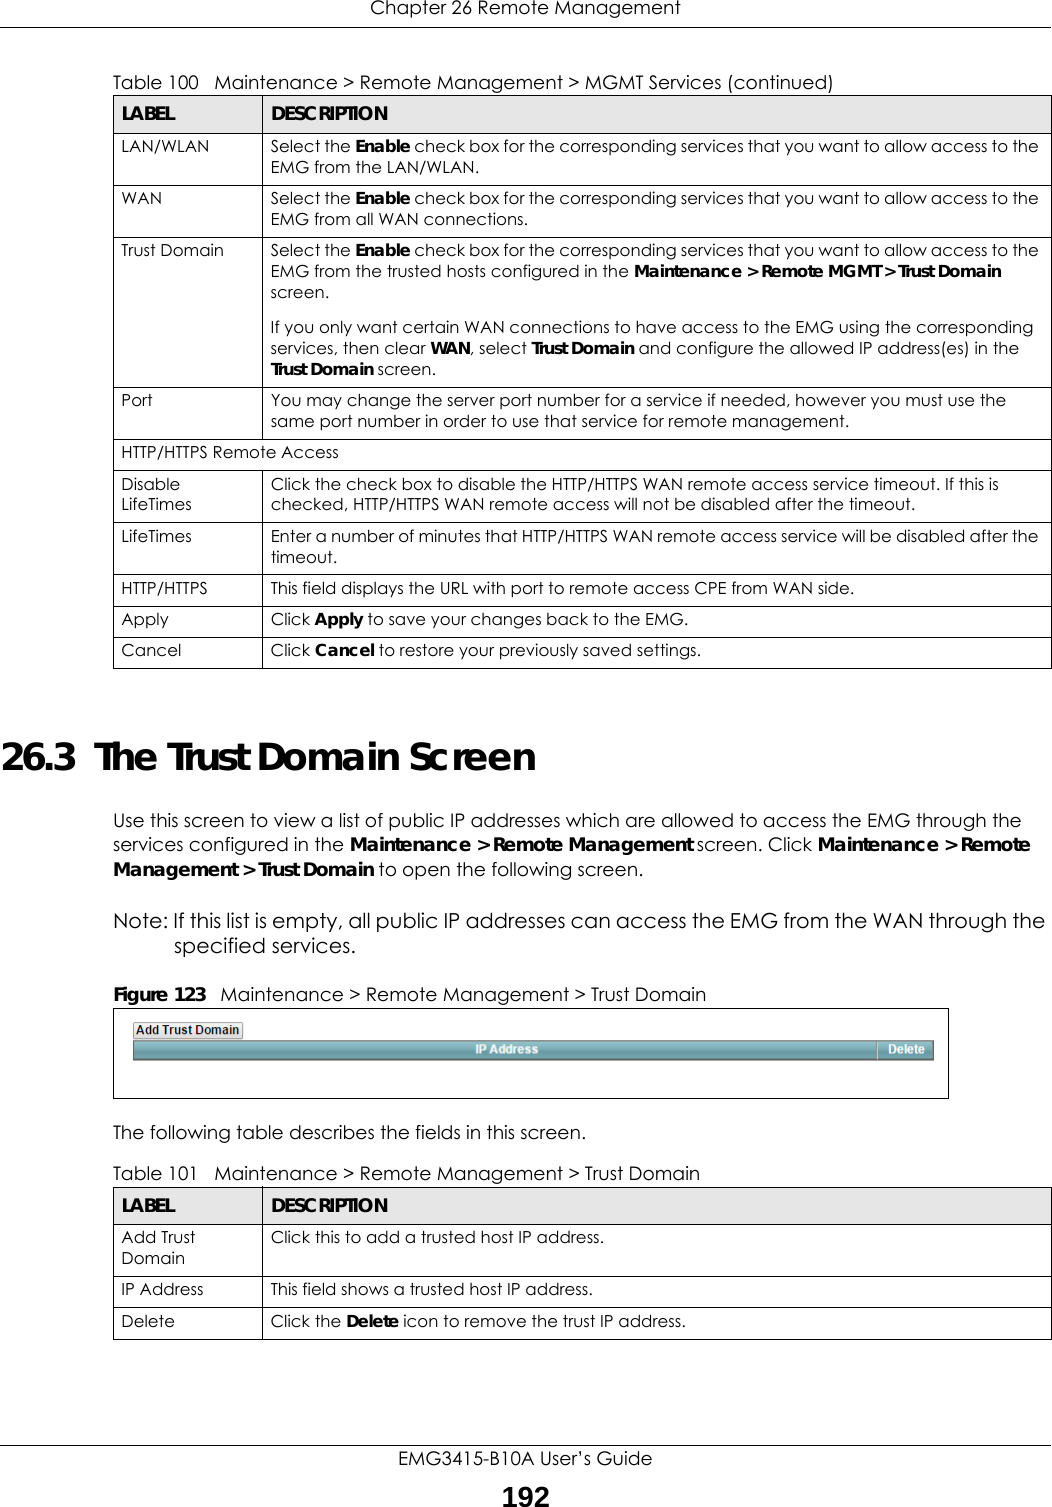 Chapter 26 Remote ManagementEMG3415-B10A User’s Guide19226.3  The Trust Domain ScreenUse this screen to view a list of public IP addresses which are allowed to access the EMG through the services configured in the Maintenance &gt; Remote Management screen. Click Maintenance &gt; Remote Management &gt; Trust Domain to open the following screen. Note: If this list is empty, all public IP addresses can access the EMG from the WAN through the specified services.Figure 123   Maintenance &gt; Remote Management &gt; Trust Domain The following table describes the fields in this screen. LAN/WLAN Select the Enable check box for the corresponding services that you want to allow access to the EMG from the LAN/WLAN.WAN Select the Enable check box for the corresponding services that you want to allow access to the EMG from all WAN connections.Trust Domain Select the Enable check box for the corresponding services that you want to allow access to the EMG from the trusted hosts configured in the Maintenance &gt; Remote MGMT &gt; Trust Domain screen.If you only want certain WAN connections to have access to the EMG using the corresponding services, then clear WAN, select Trust Domain and configure the allowed IP address(es) in the Trust Domain screen. Port You may change the server port number for a service if needed, however you must use the same port number in order to use that service for remote management.HTTP/HTTPS Remote AccessDisable LifeTimesClick the check box to disable the HTTP/HTTPS WAN remote access service timeout. If this is checked, HTTP/HTTPS WAN remote access will not be disabled after the timeout.LifeTimes Enter a number of minutes that HTTP/HTTPS WAN remote access service will be disabled after the timeout.HTTP/HTTPS This field displays the URL with port to remote access CPE from WAN side.Apply Click Apply to save your changes back to the EMG.Cancel Click Cancel to restore your previously saved settings.Table 100   Maintenance &gt; Remote Management &gt; MGMT Services (continued)LABEL DESCRIPTIONTable 101   Maintenance &gt; Remote Management &gt; Trust Domain LABEL DESCRIPTIONAdd Trust DomainClick this to add a trusted host IP address.IP Address This field shows a trusted host IP address.Delete Click the Delete icon to remove the trust IP address.